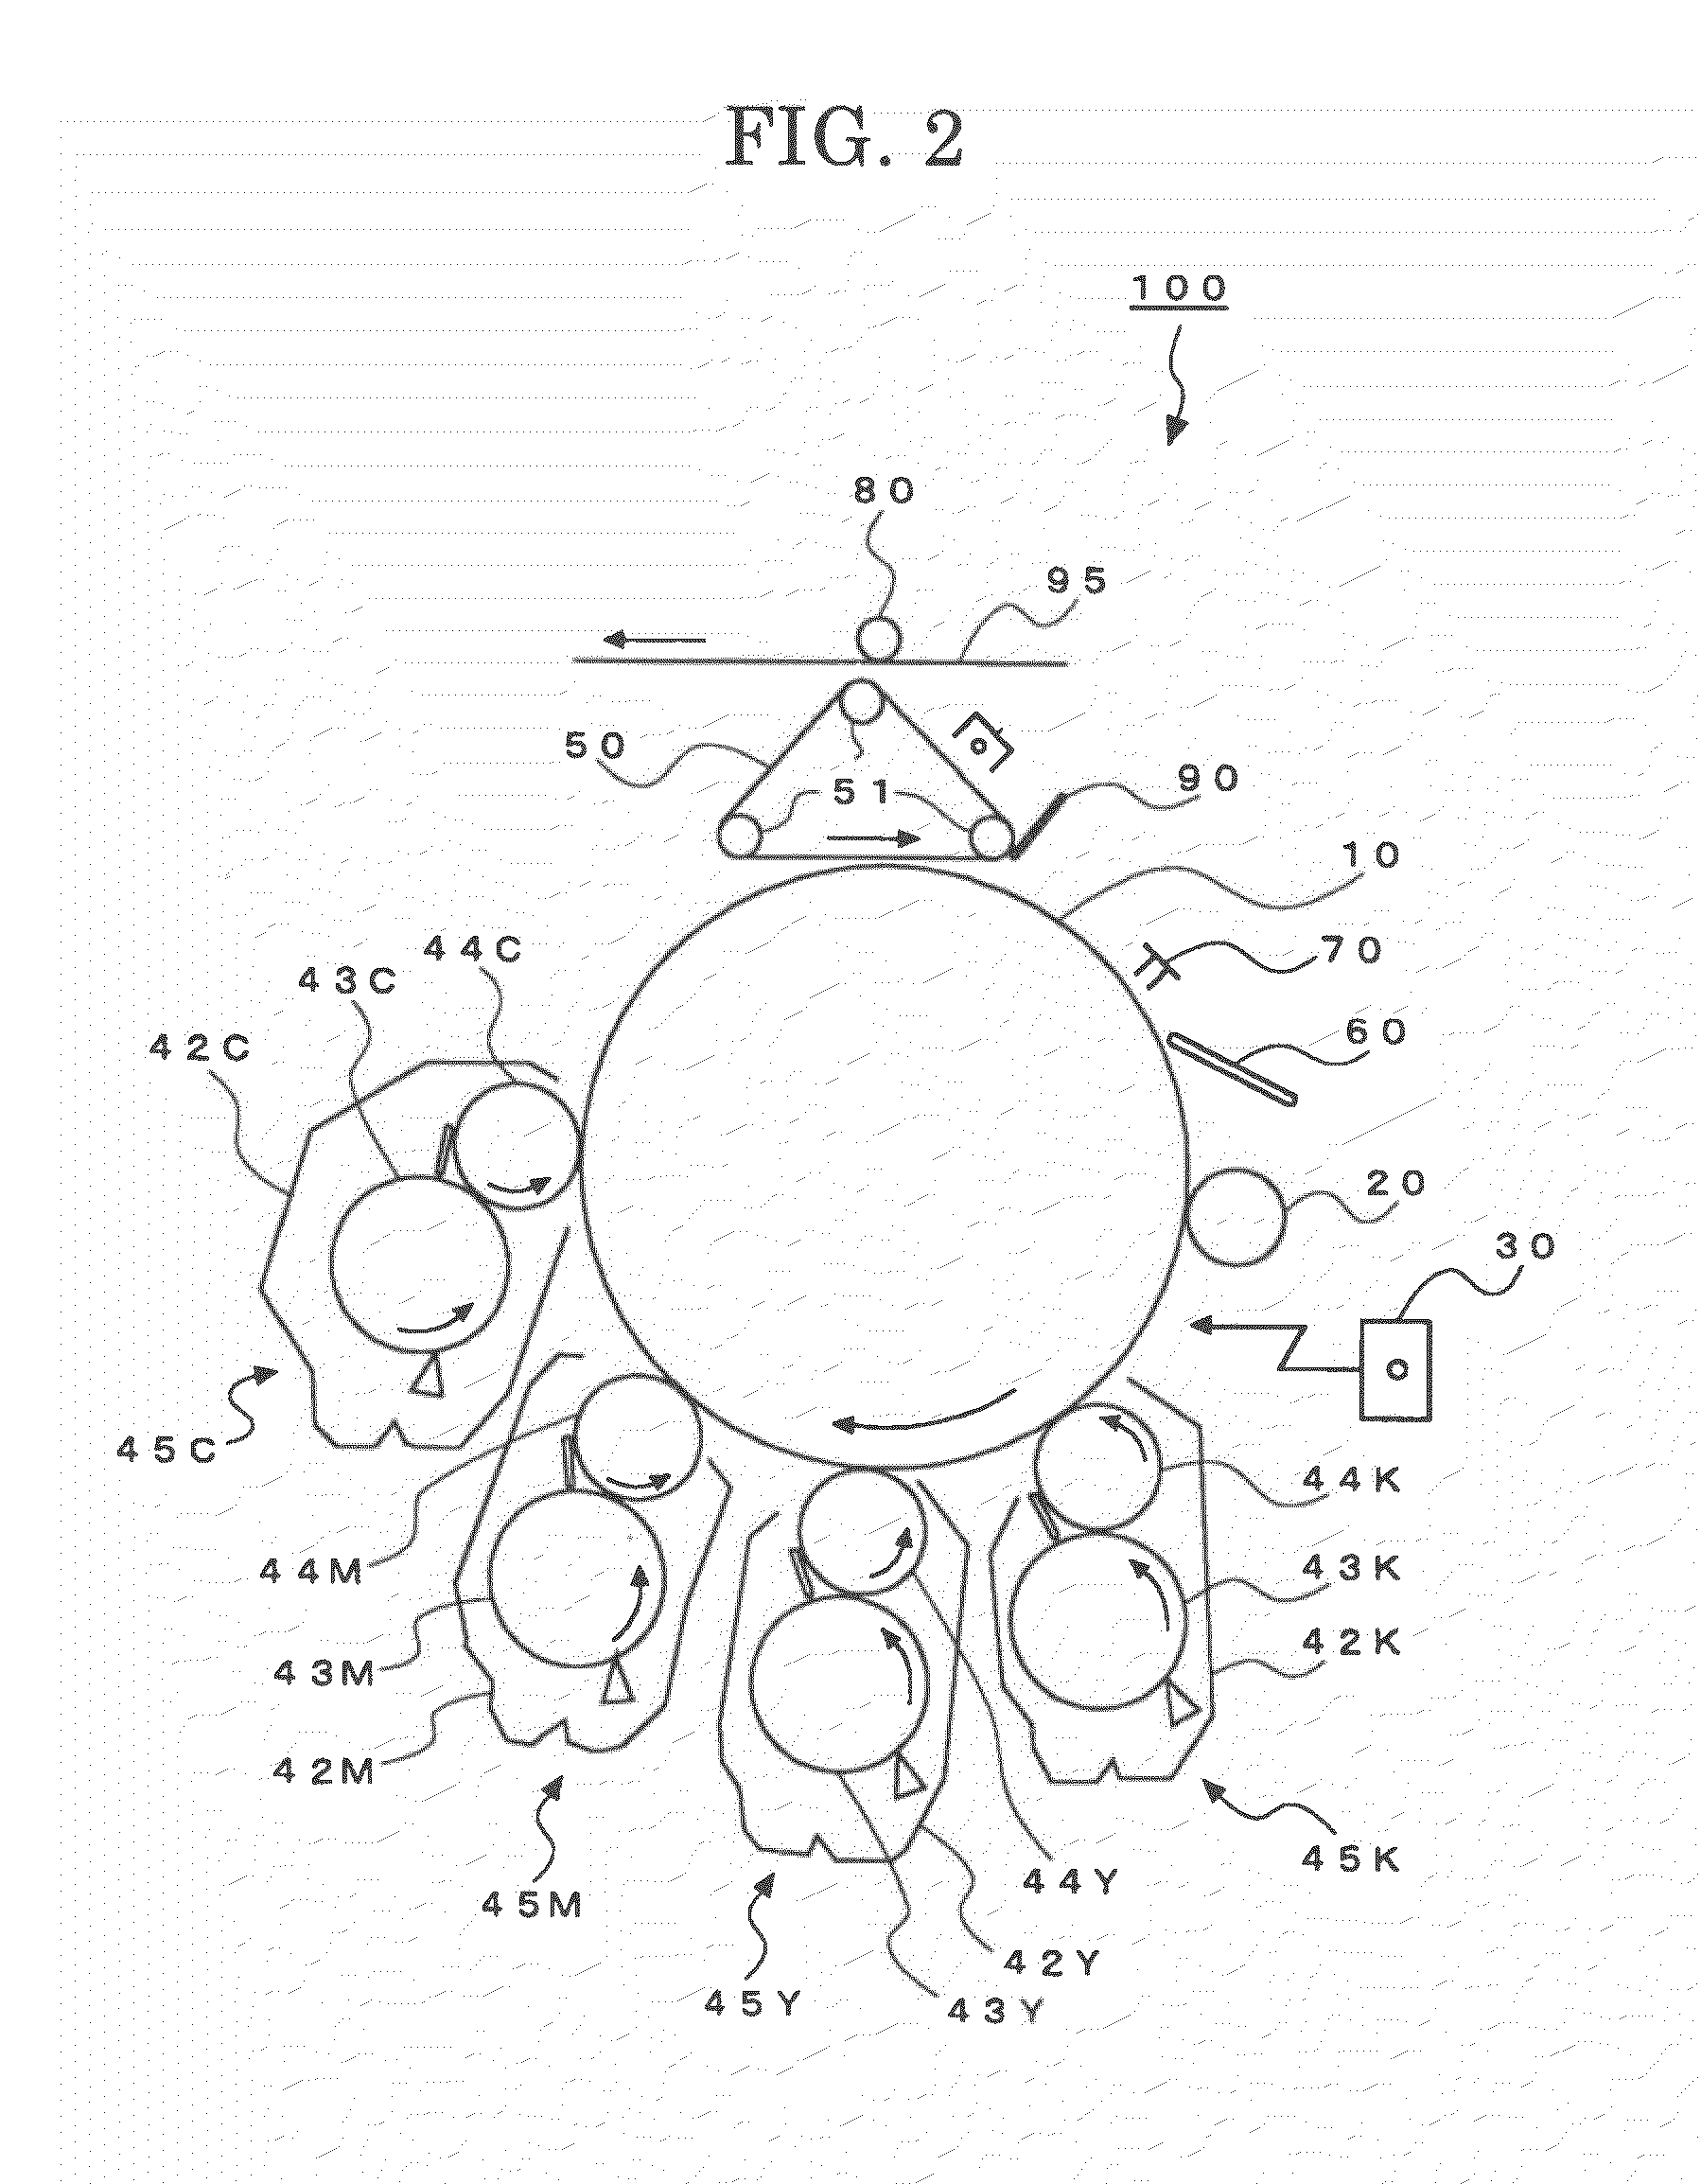 Toner colorant, electrophotographic toner, two-component developer, image forming method, image forming apparatus, and process cartridge